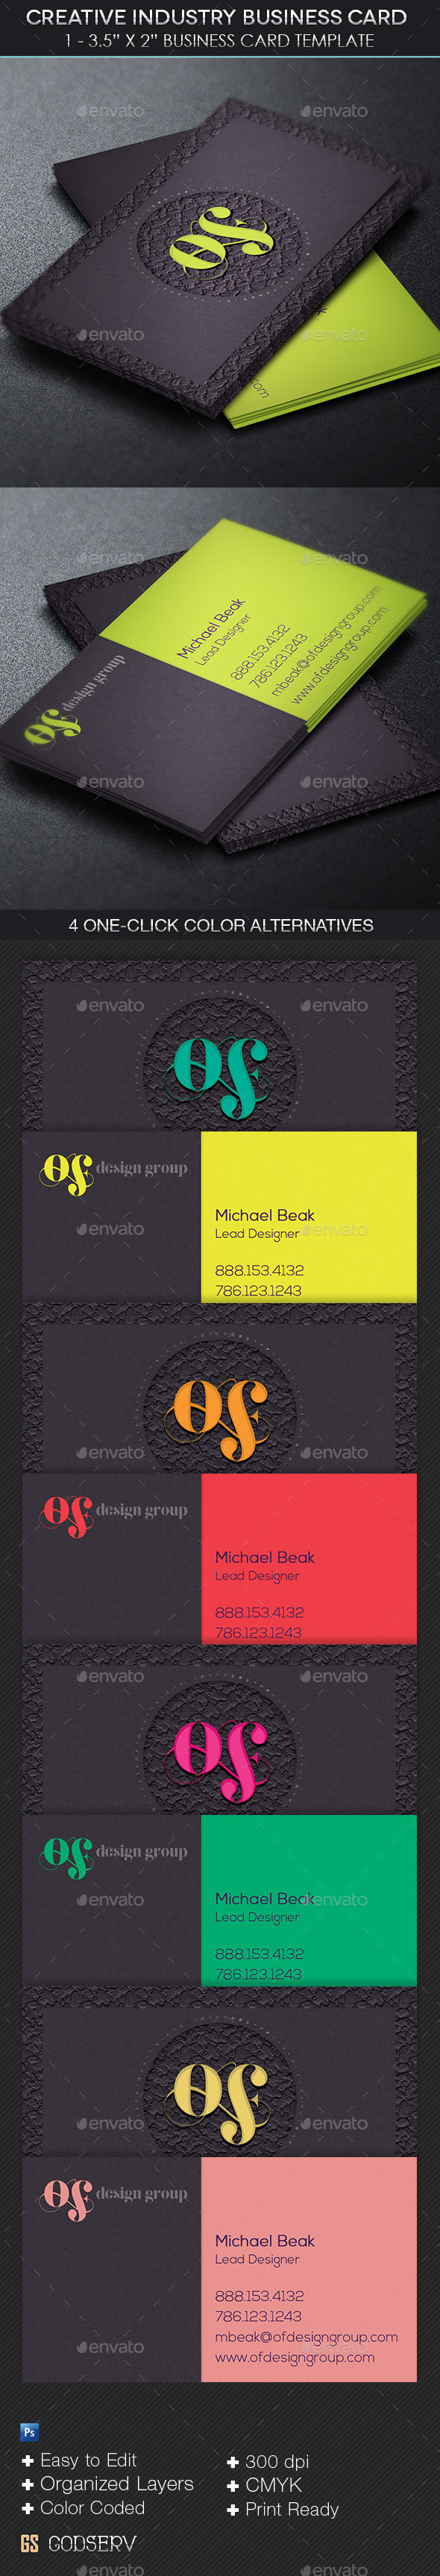 Creative Industry Business Card Template